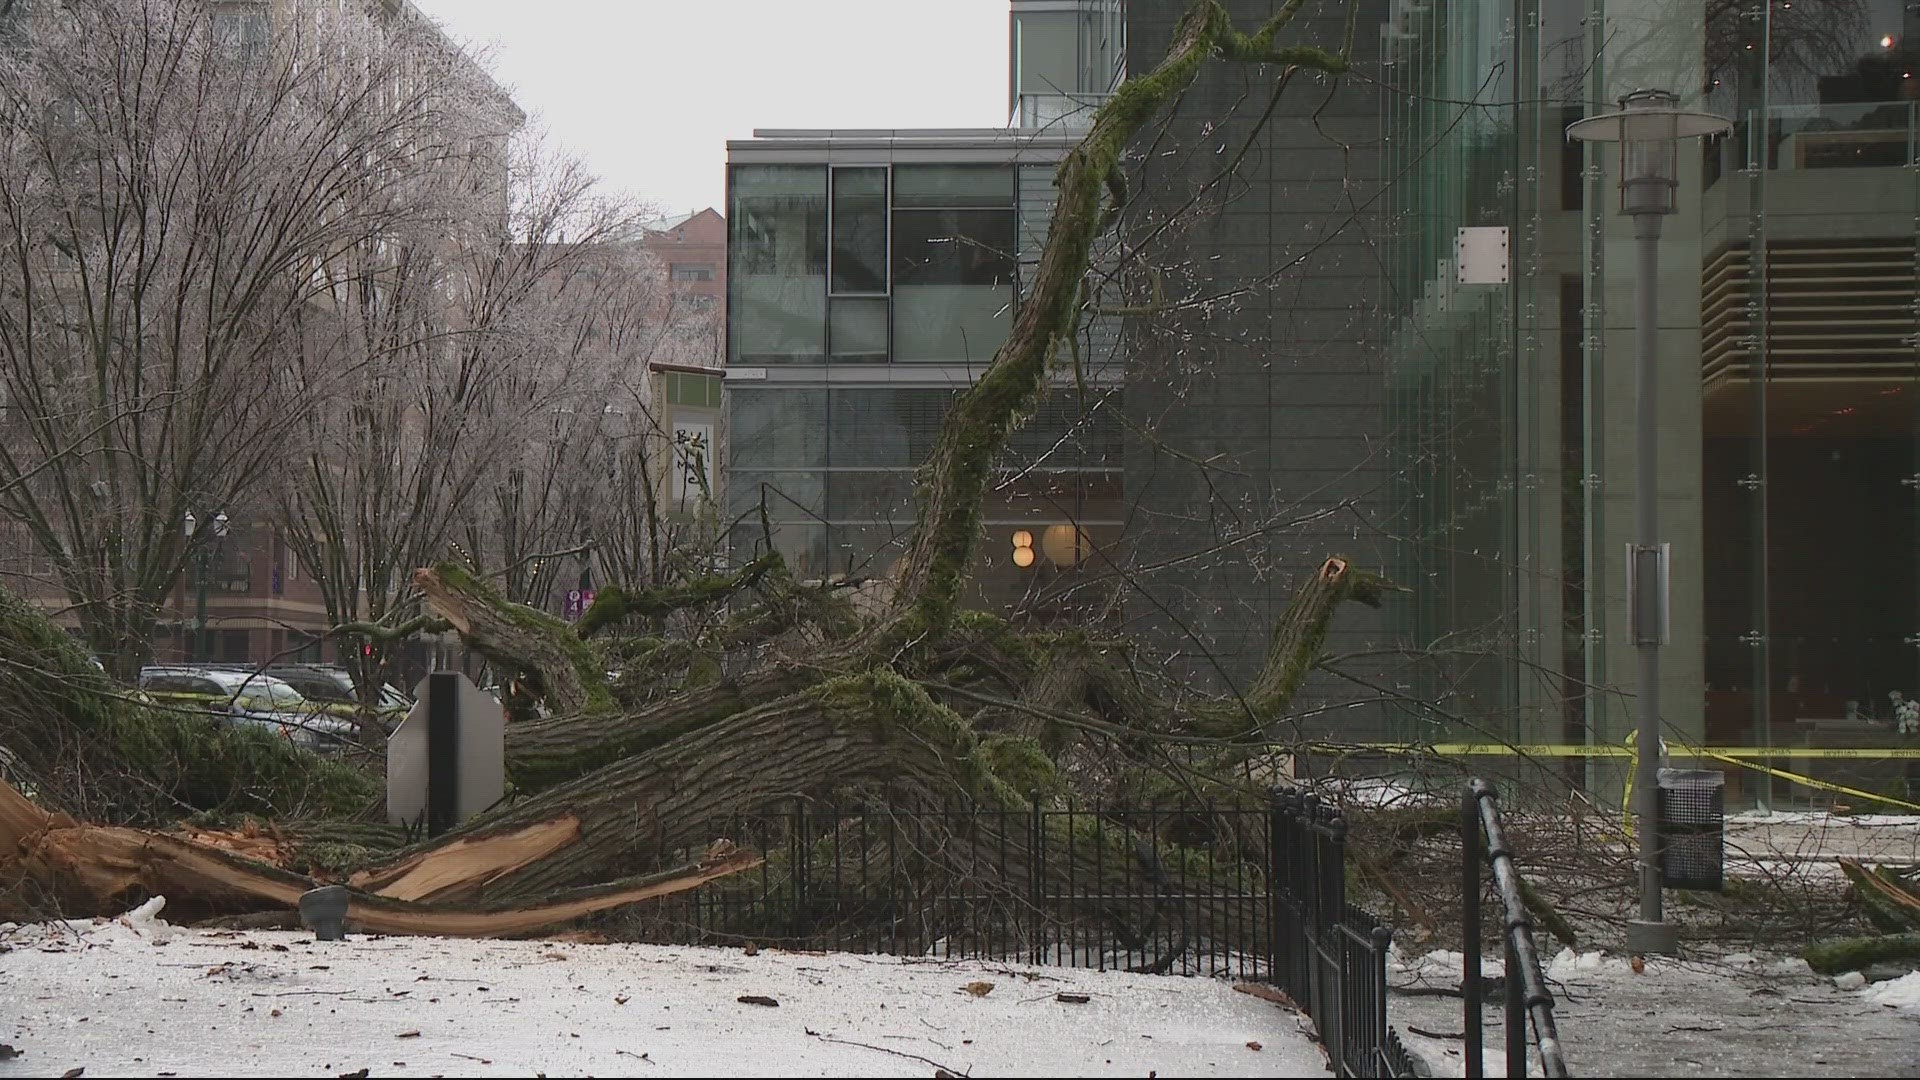 Portland Parks and Recreation got at least 380 reports of downed trees.